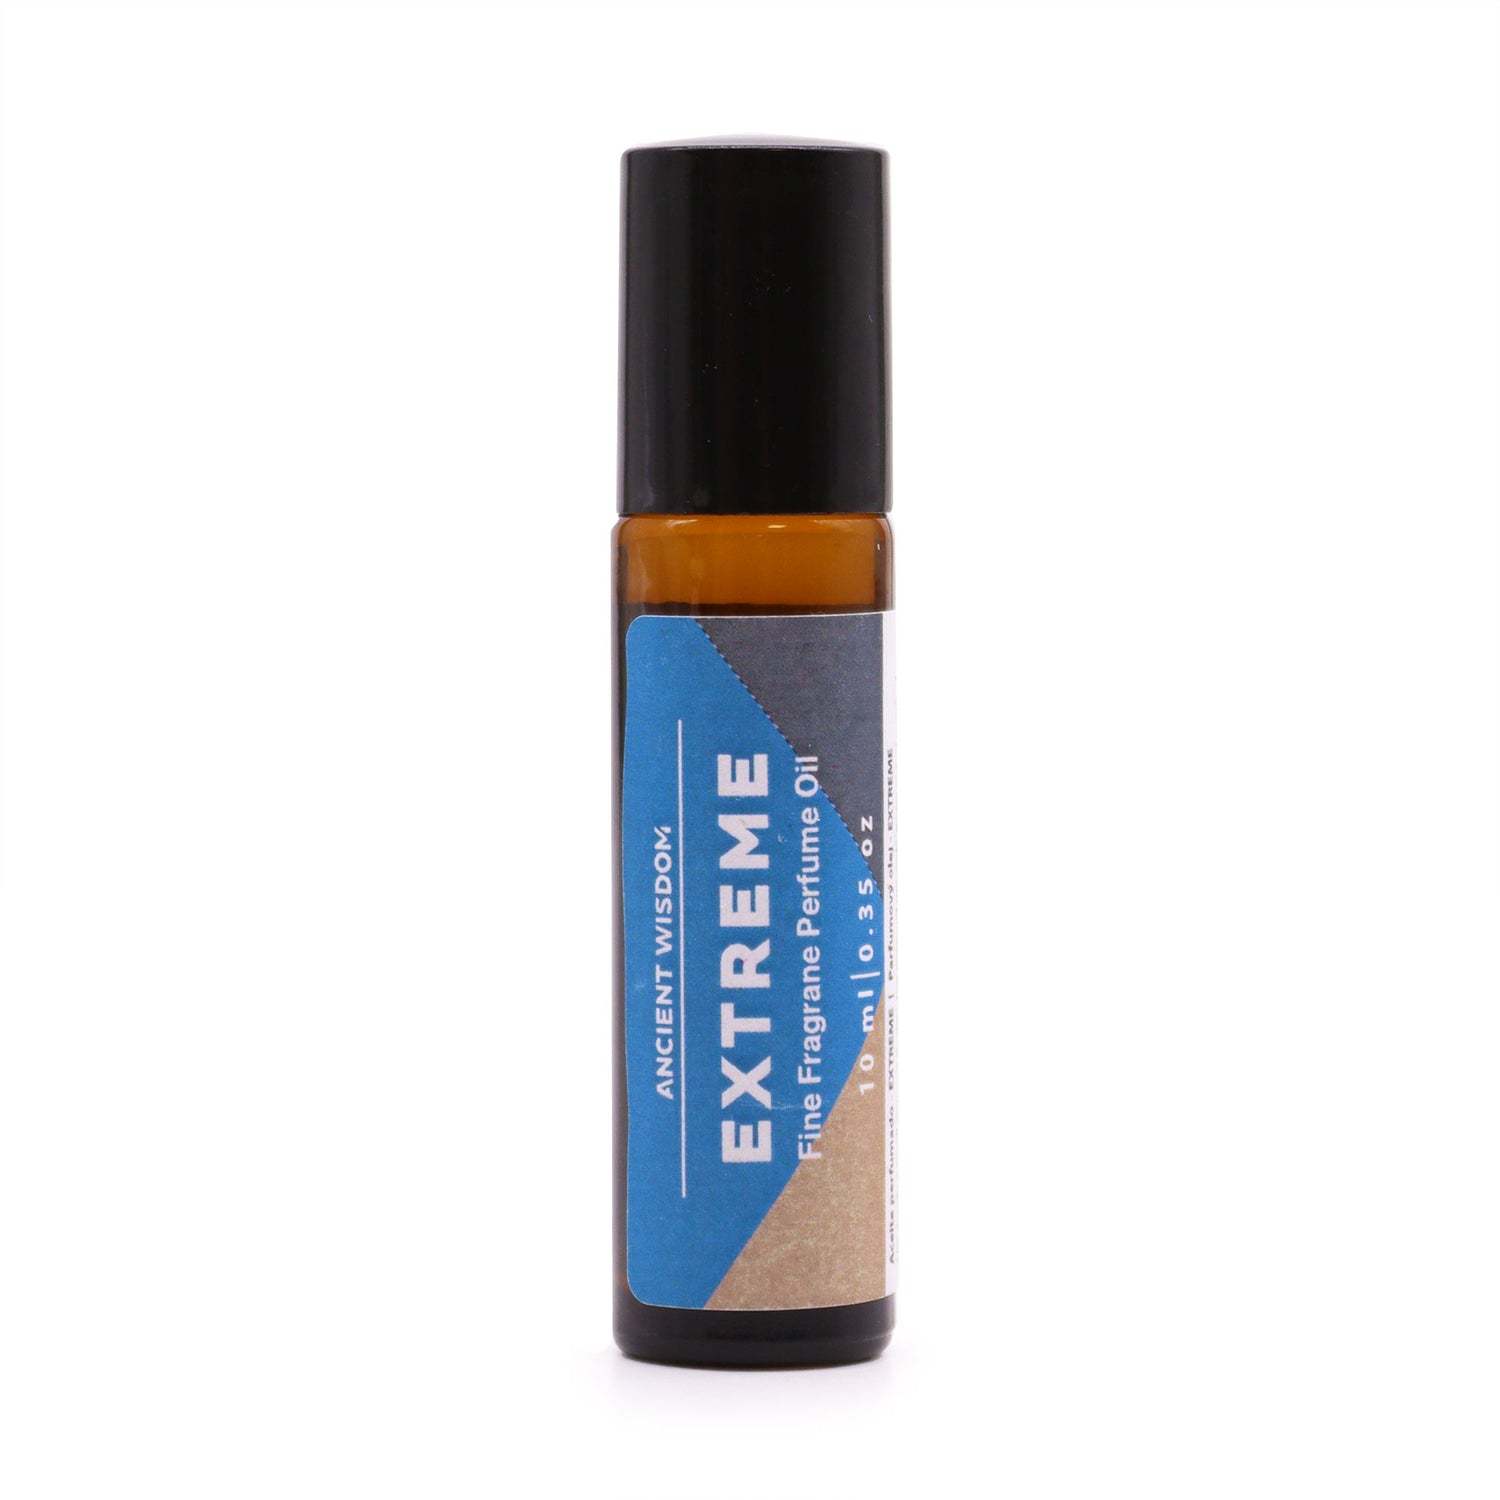 Extreme Fine Fragrance Perfume Oil 10ml - Inspired by &